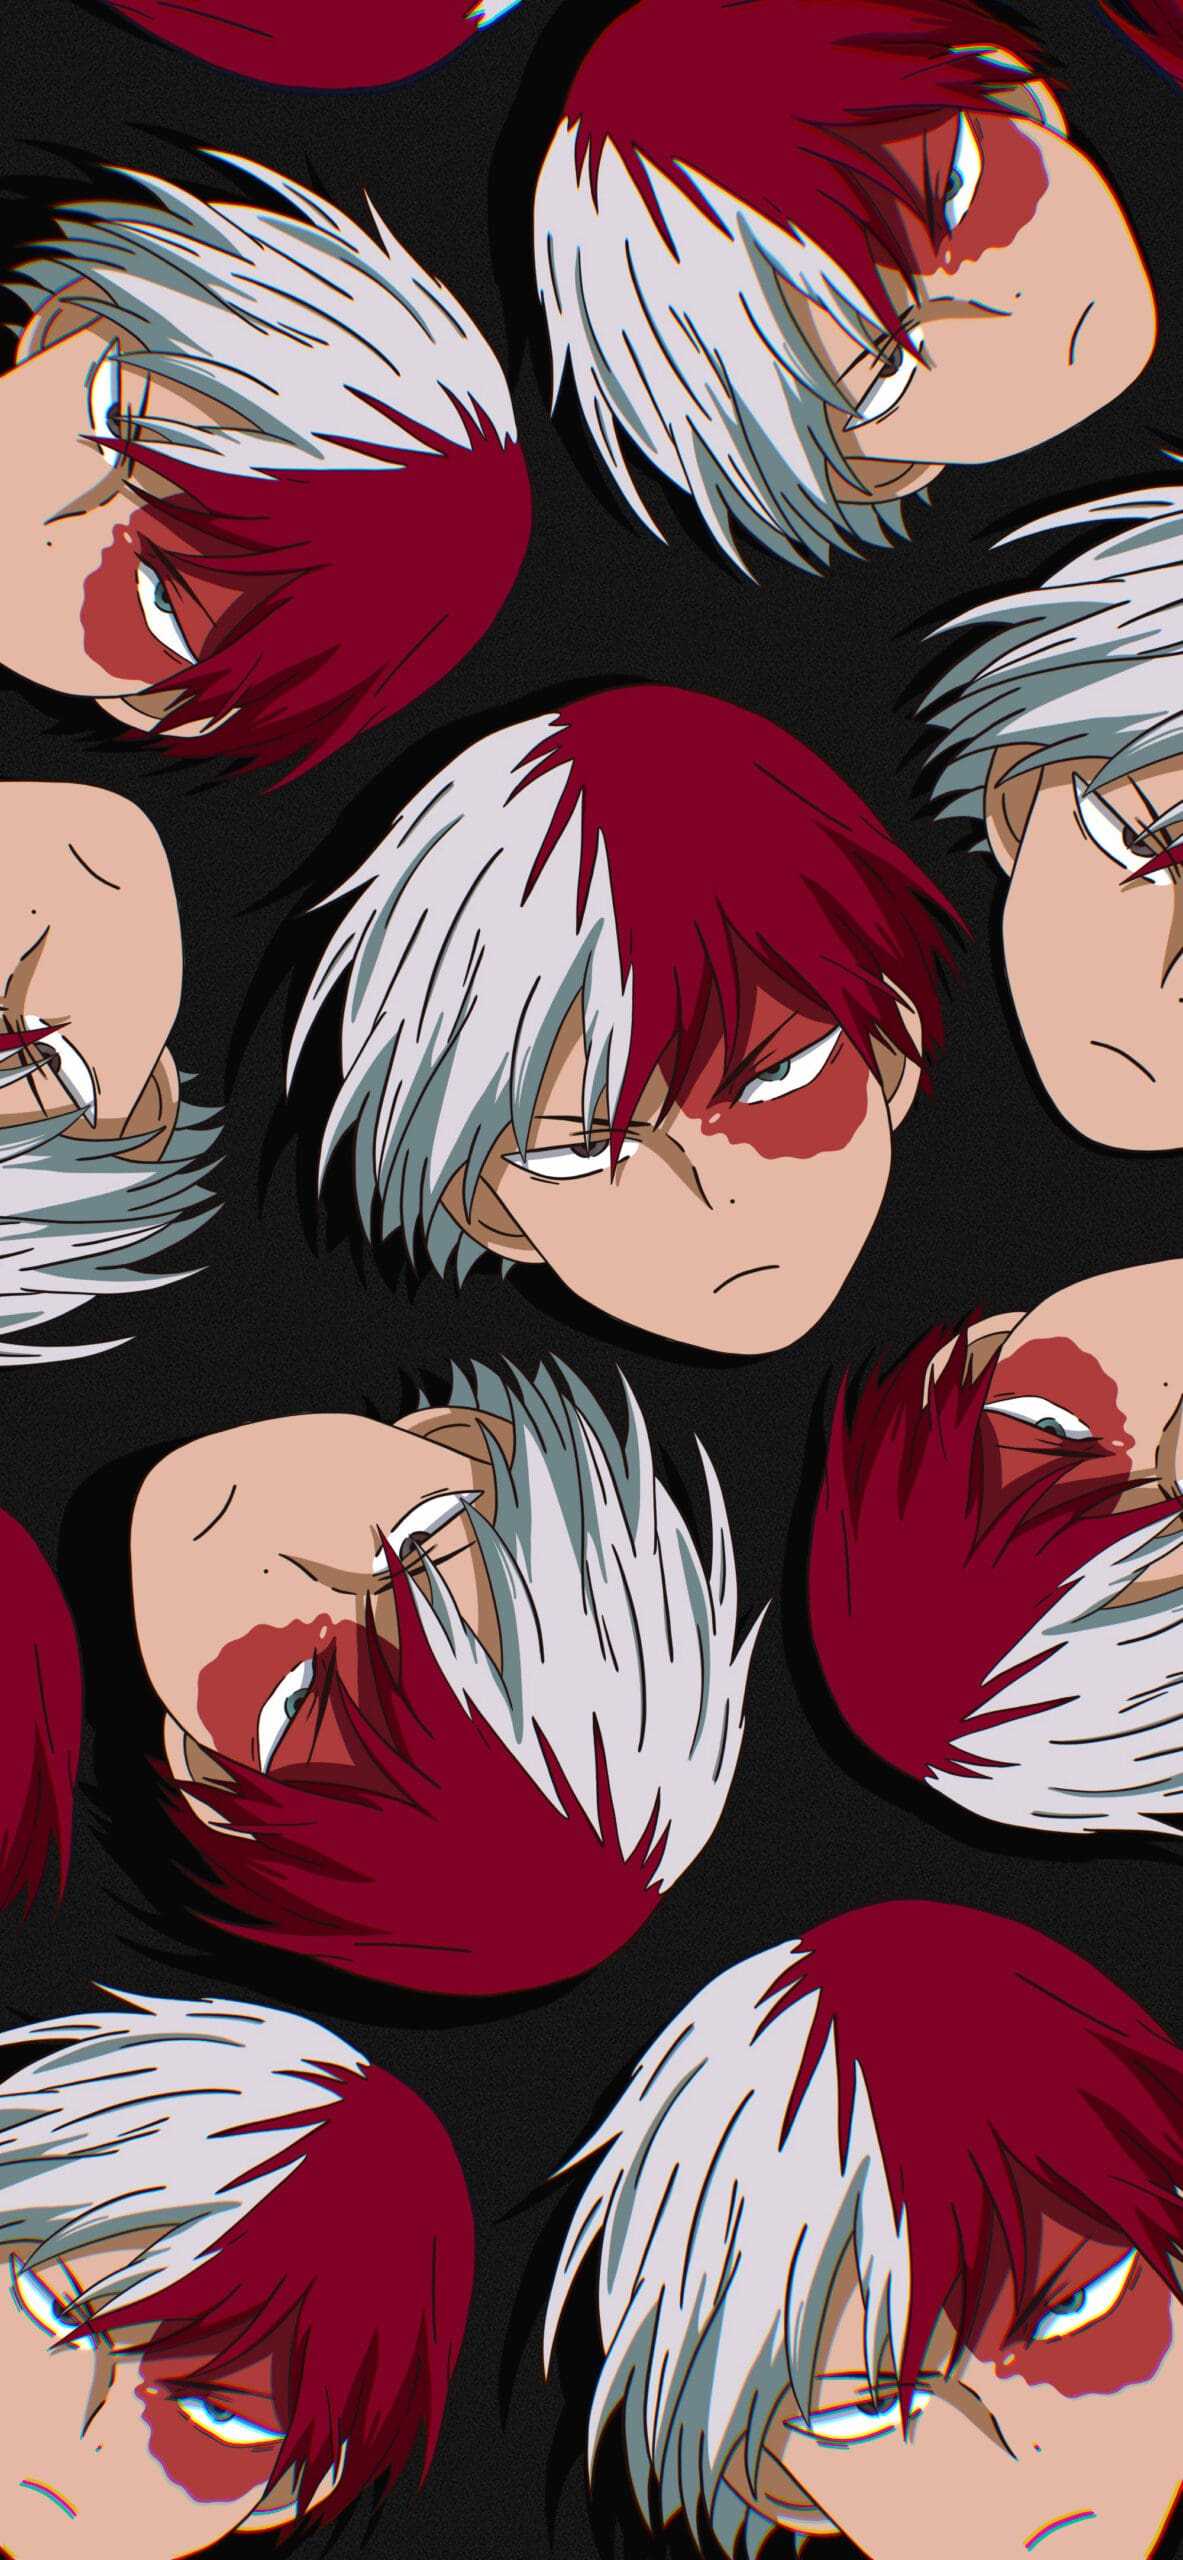 A pattern of many different anime faces - My Hero Academia